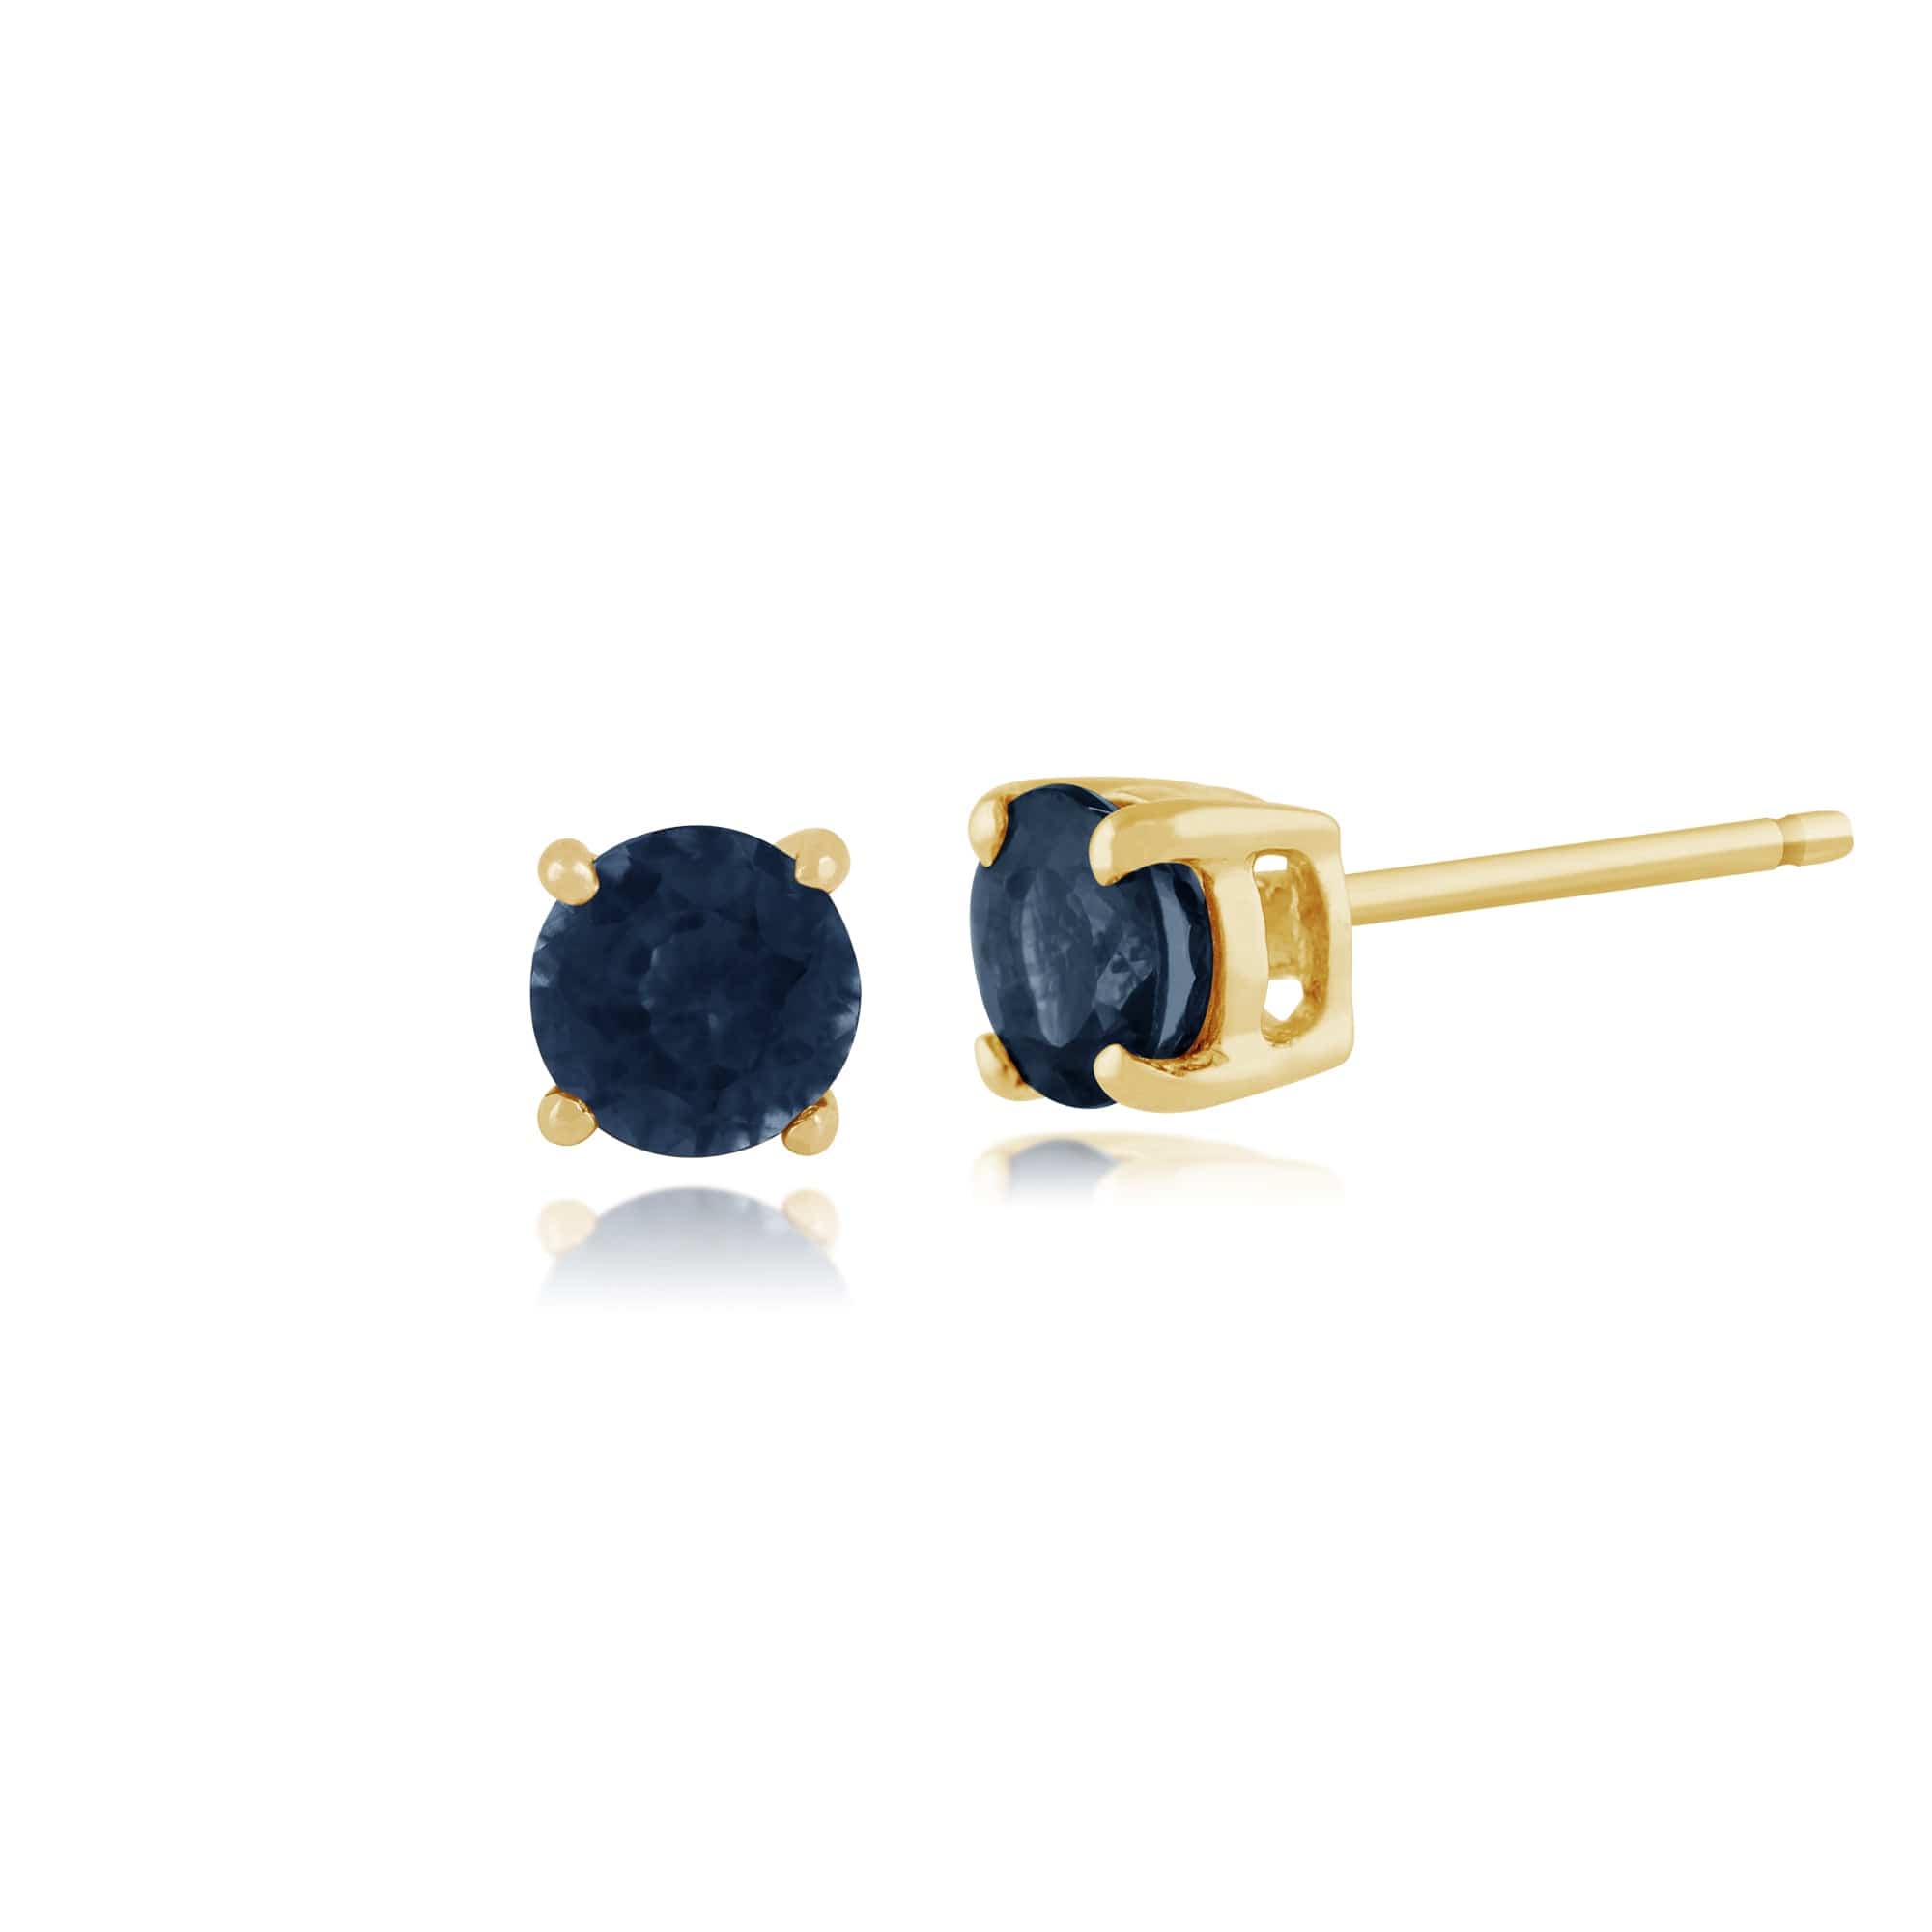 Classic Round Blue Sapphire Studs with Detachable Diamond Floral Ear Jacket in 9ct Yellow Gold - Gemondo